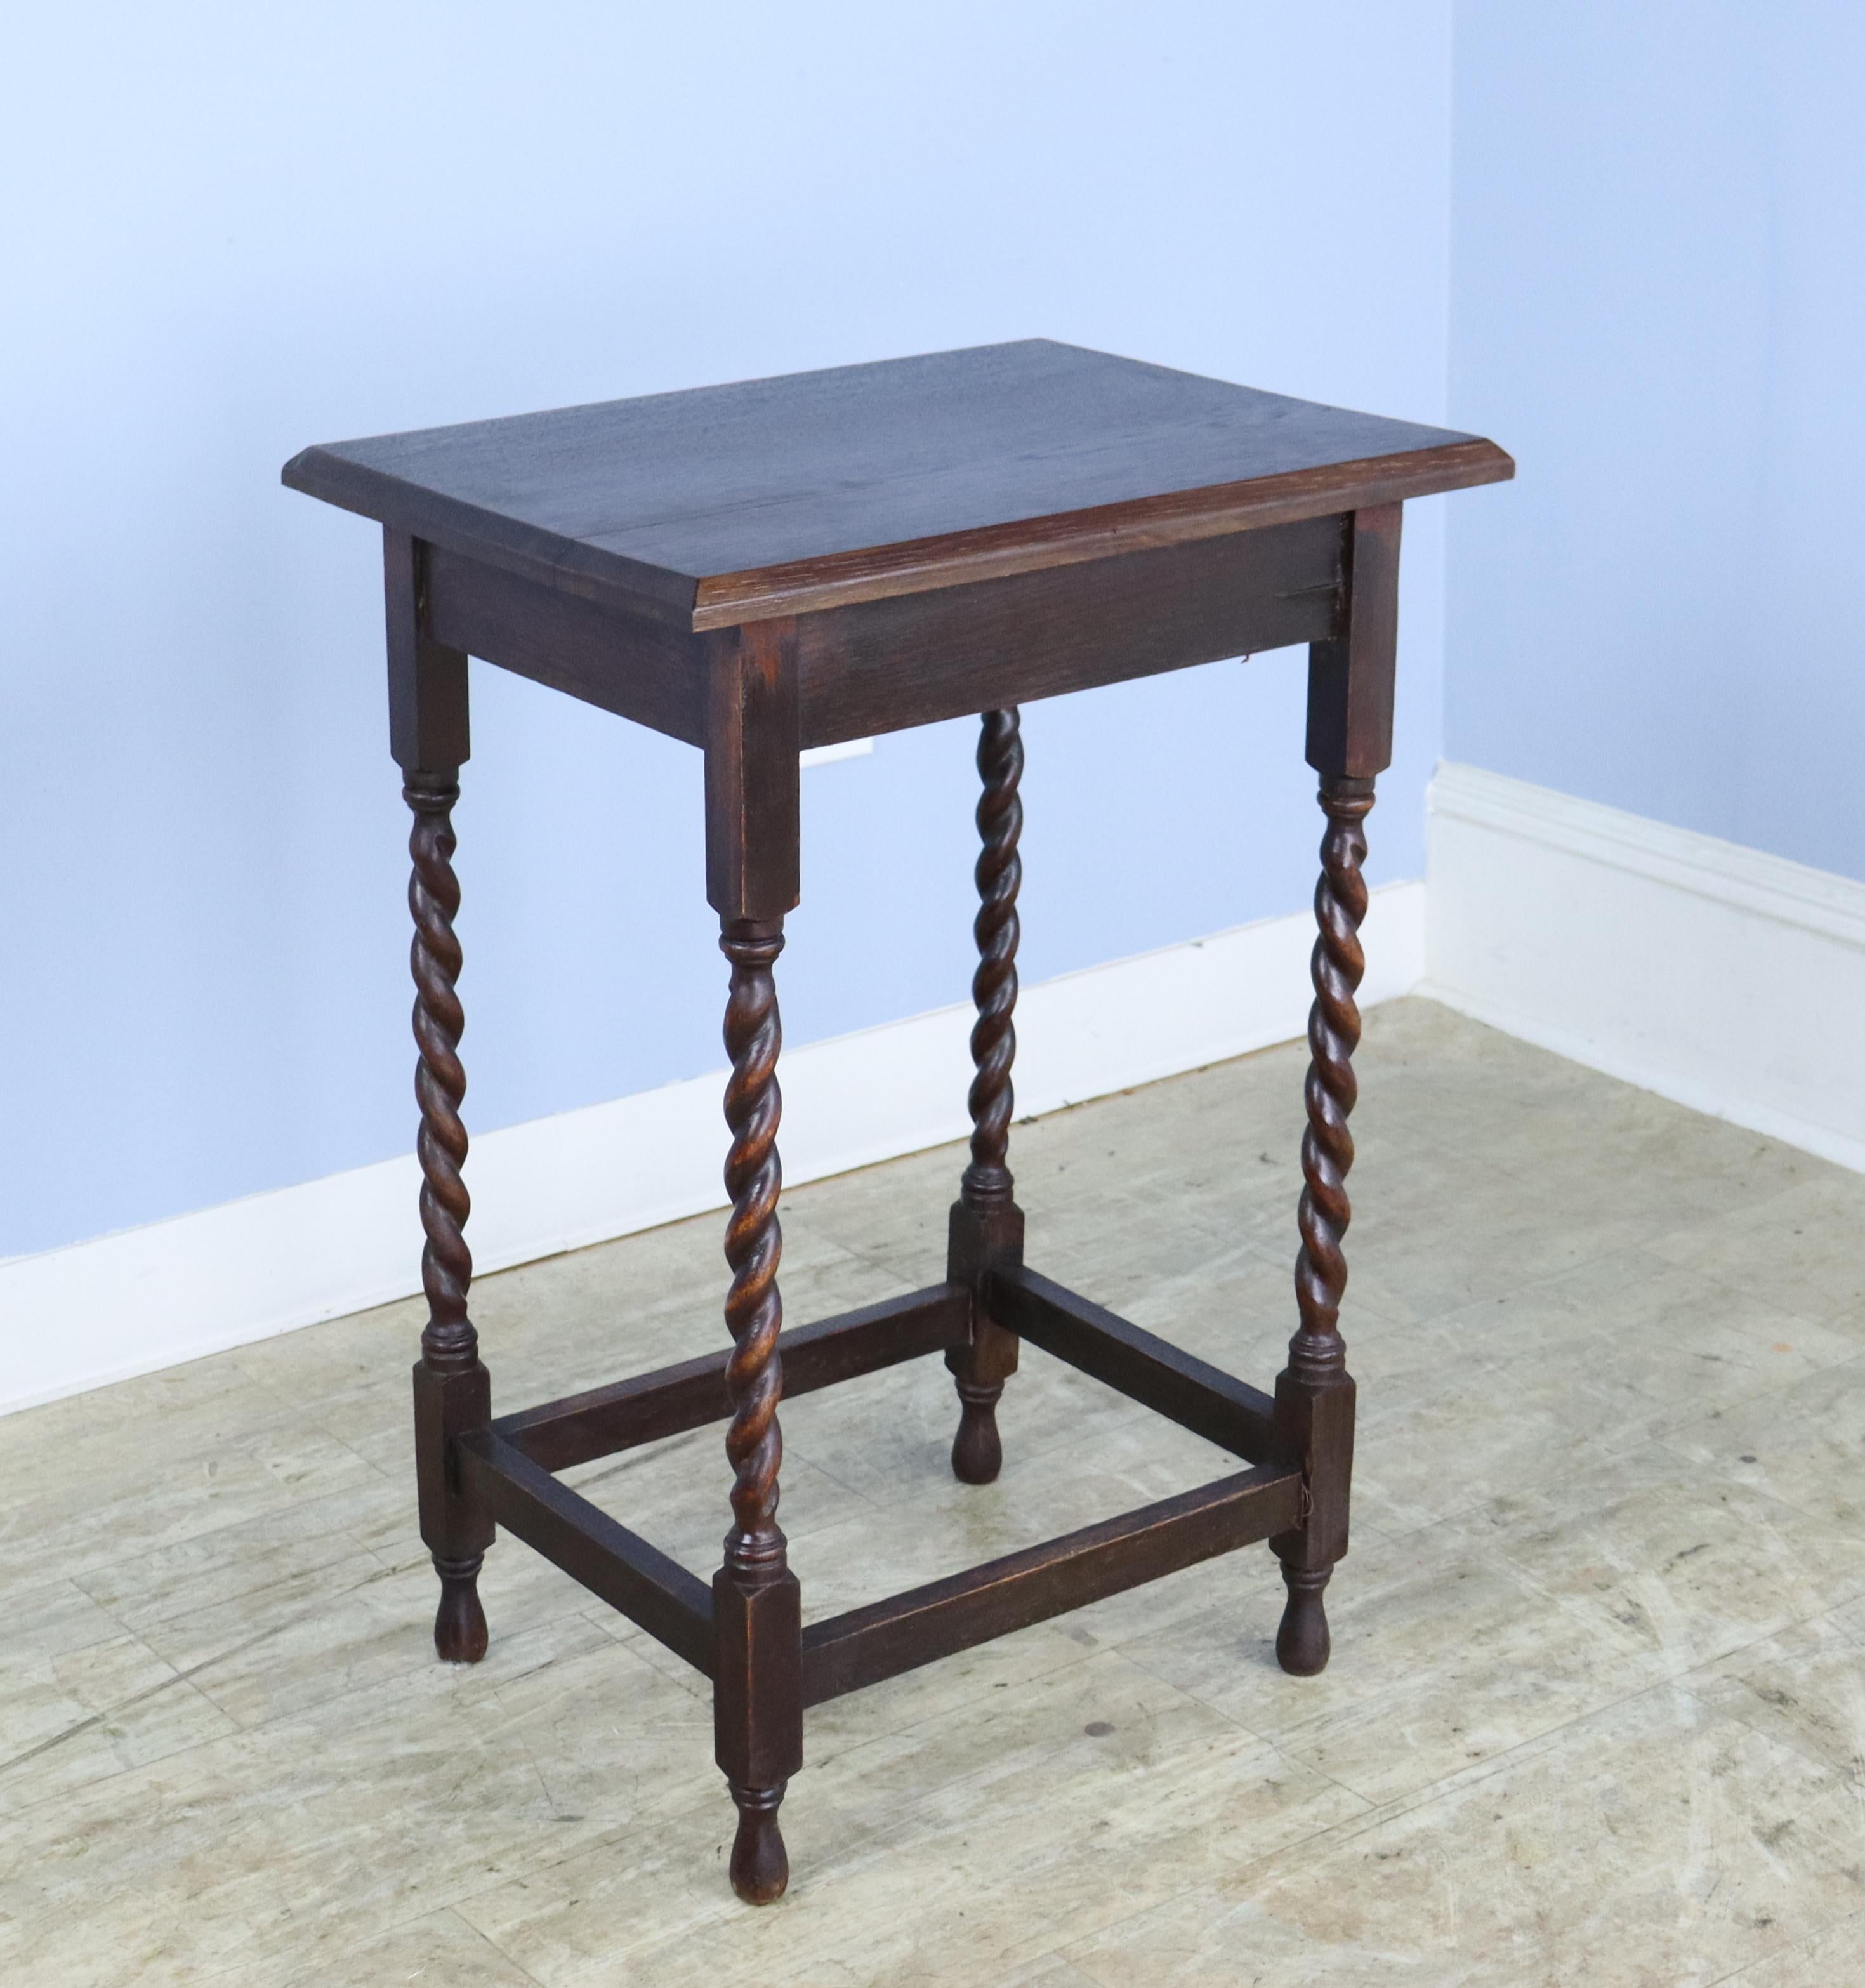 A charming simple occasional table in dark oak with eye-catching barley twist detail. Would also make a nice lamp table, and would look well on either side of a sofa or guest bed.